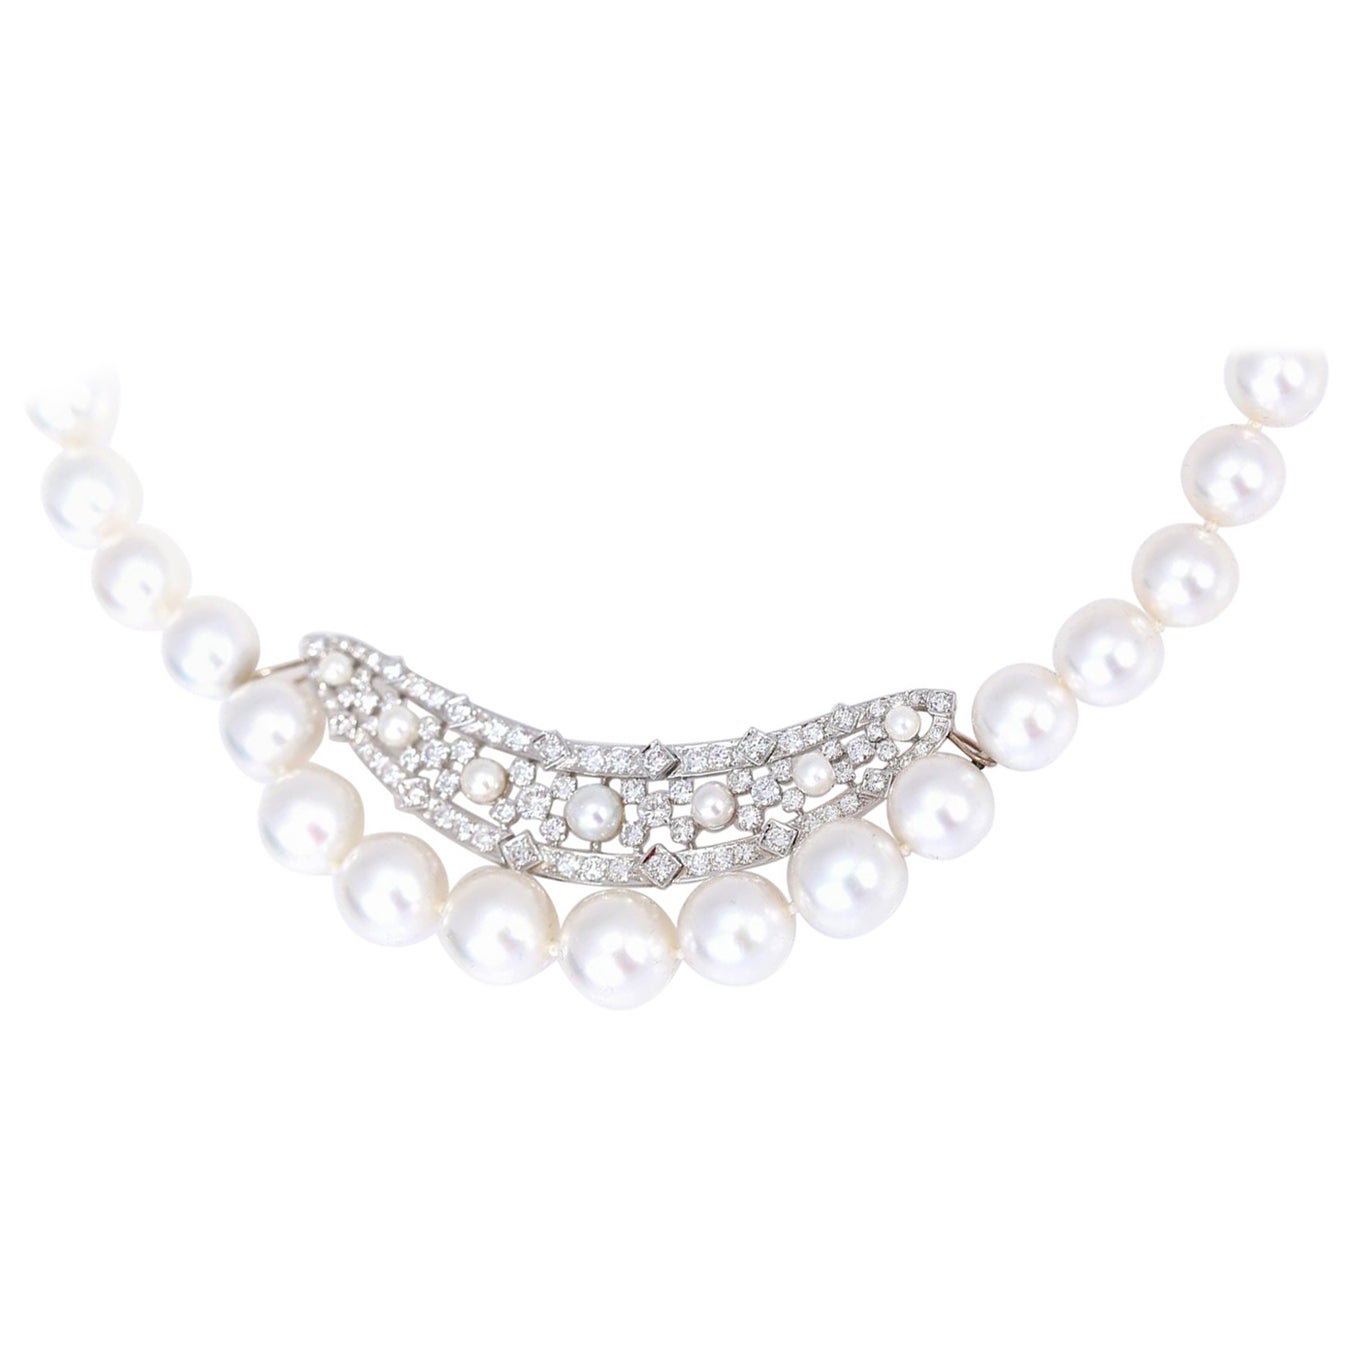 Pearls Diamonds 2.5 Carat Necklace AAA Quality, 2020